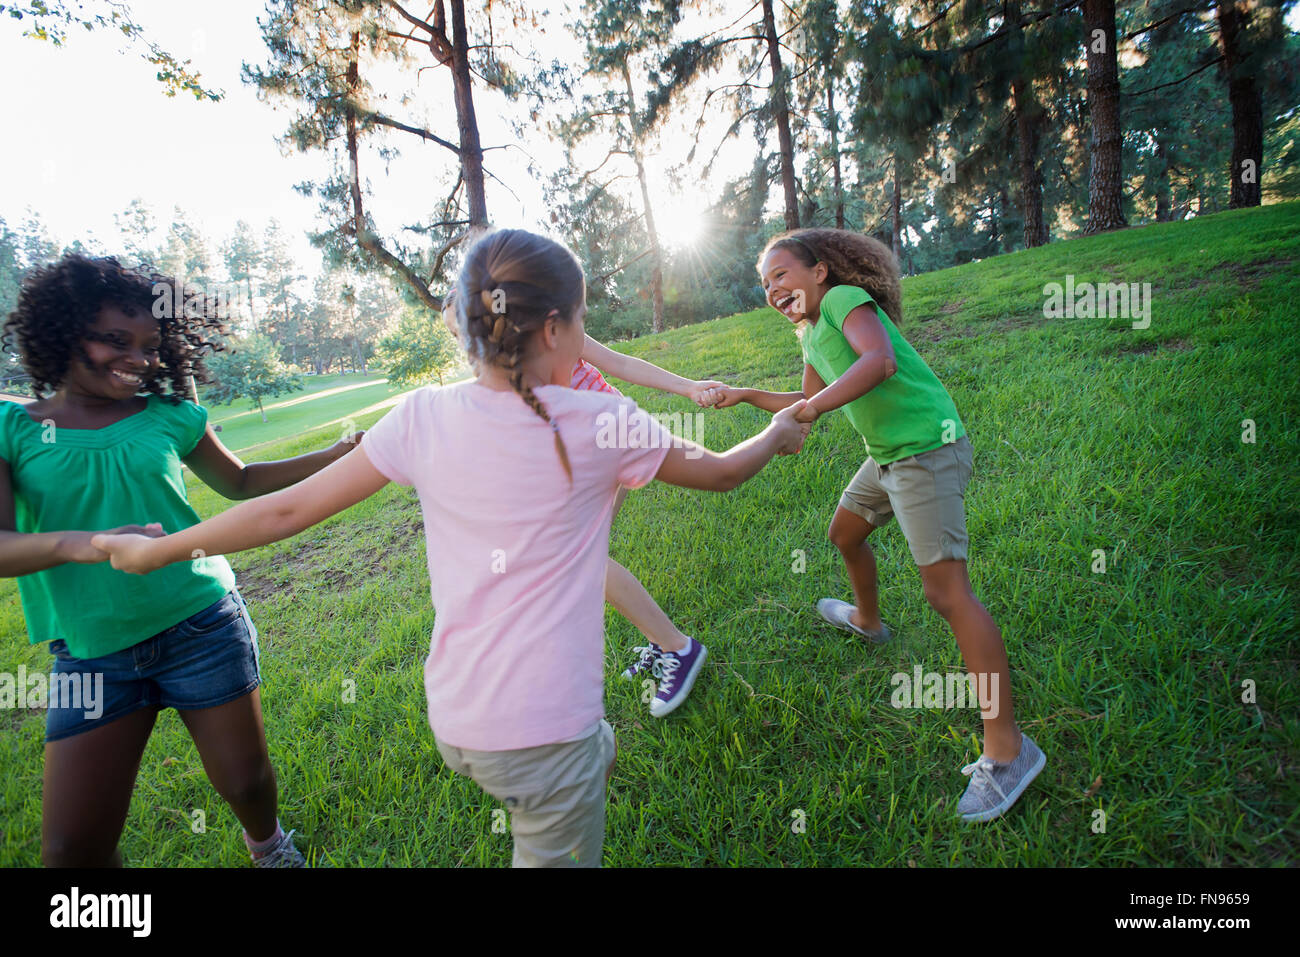 A group of four girls holding hands and dancing outside. Stock Photo